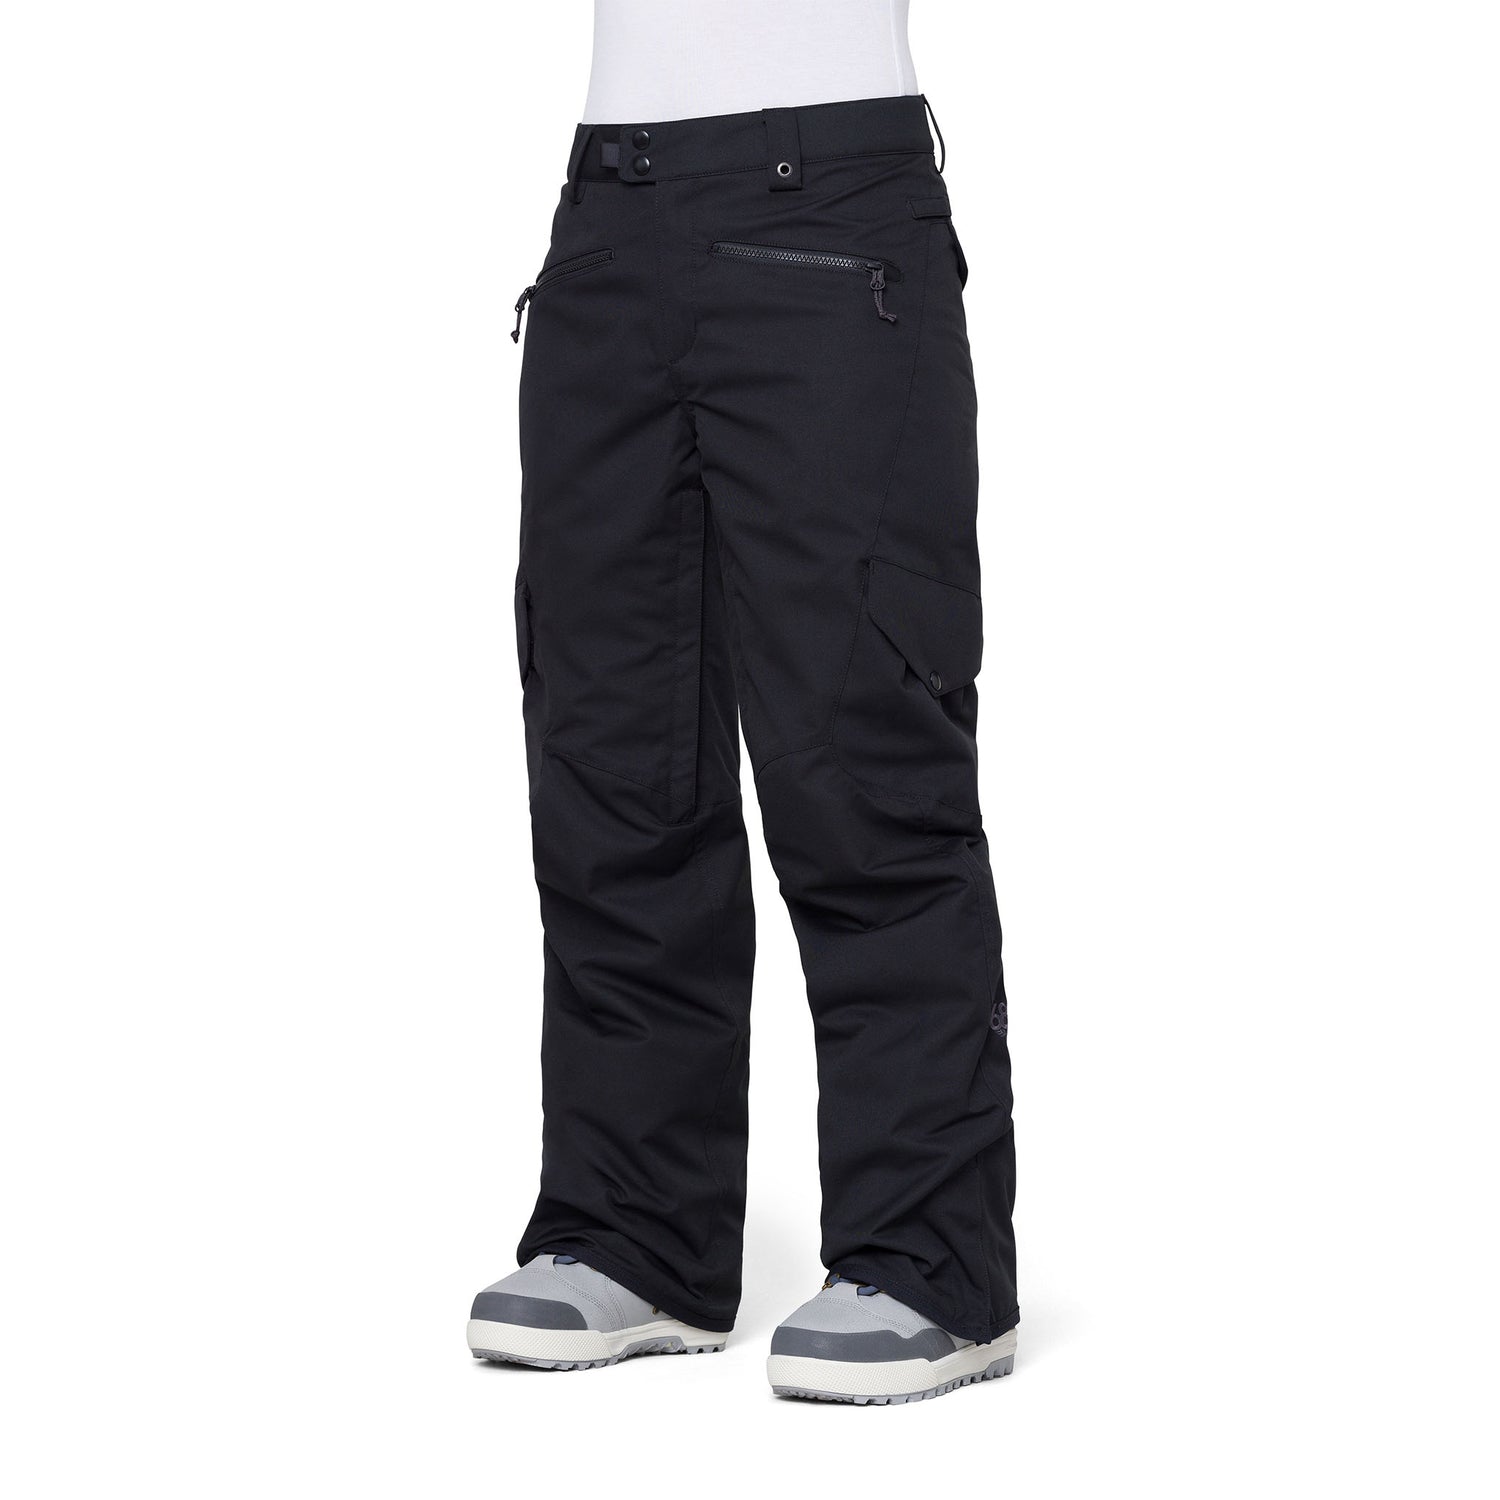 686 Women's Aura Cargo Ski and Snowboard Insulated Pant in Black